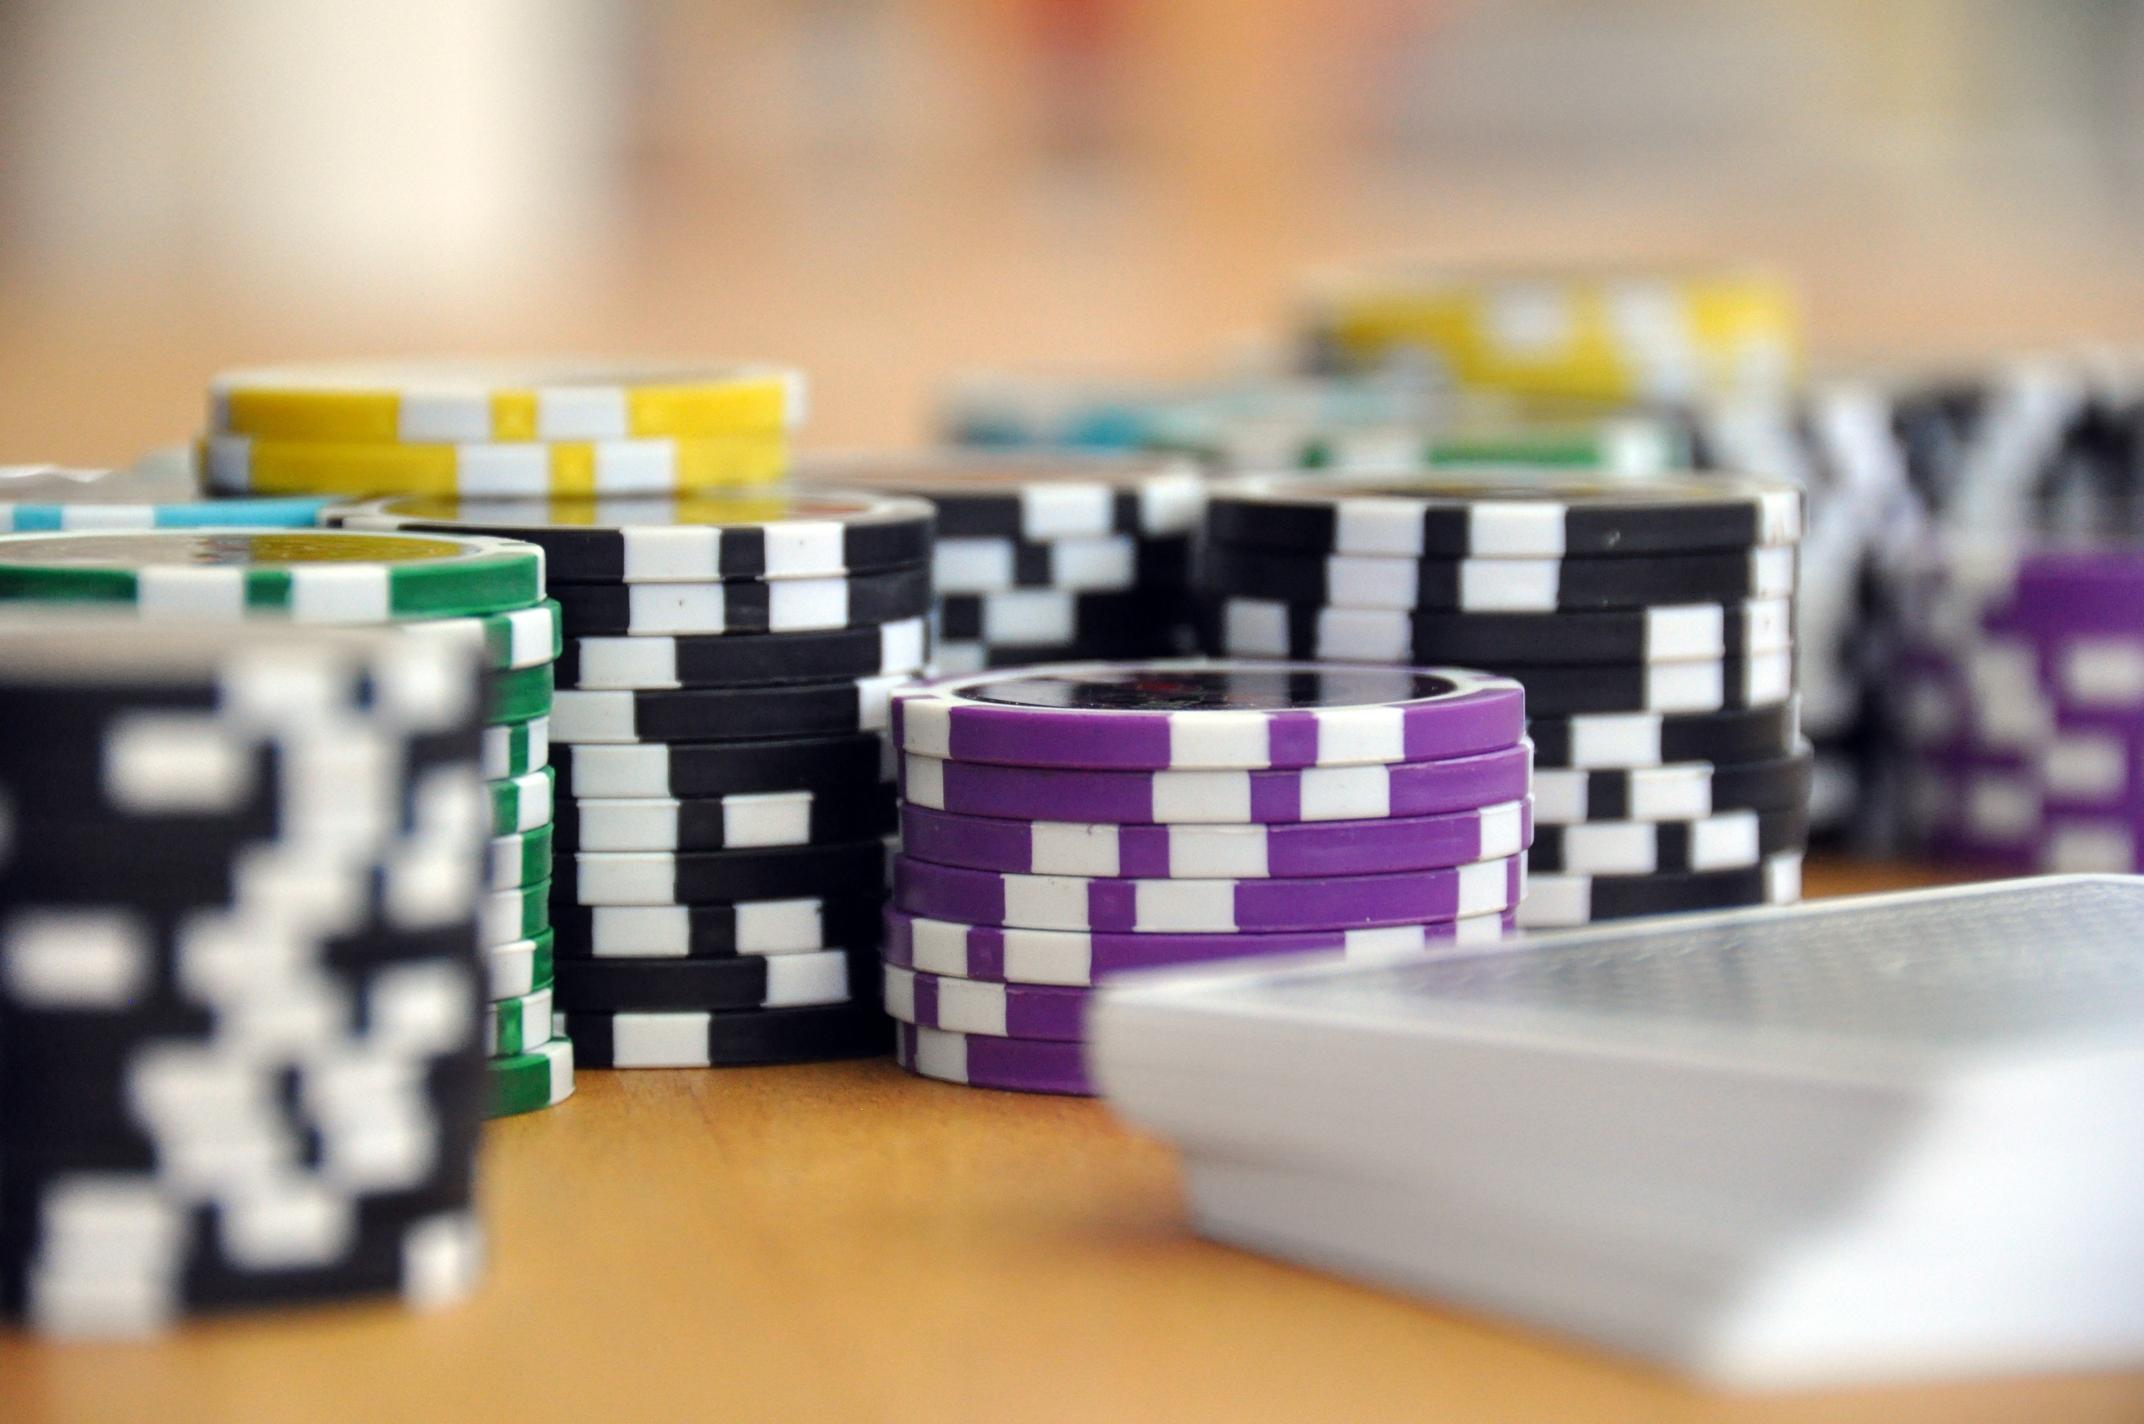 What are the top 10 examples of online casinos leveraging social media platforms?